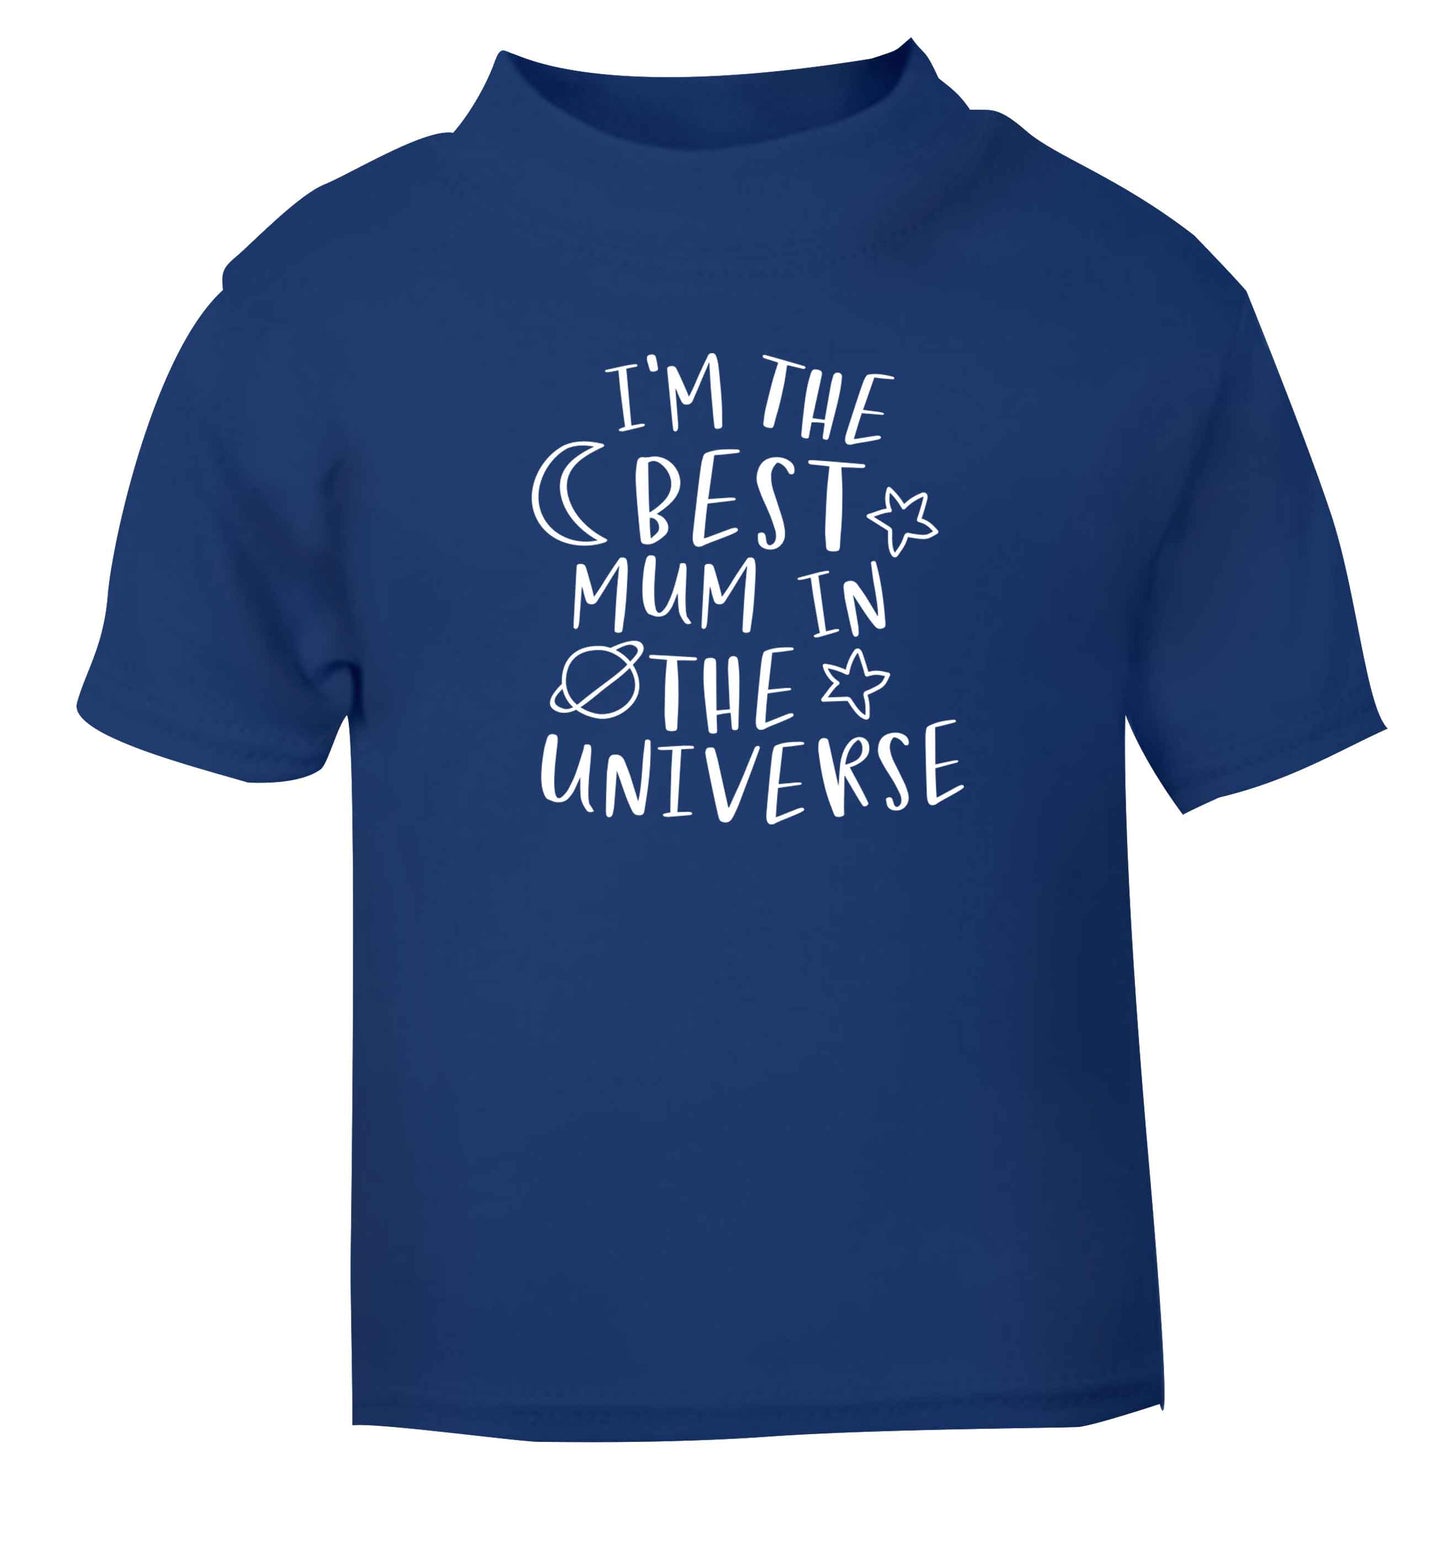 I'm the best mum in the universe blue baby toddler Tshirt 2 Years